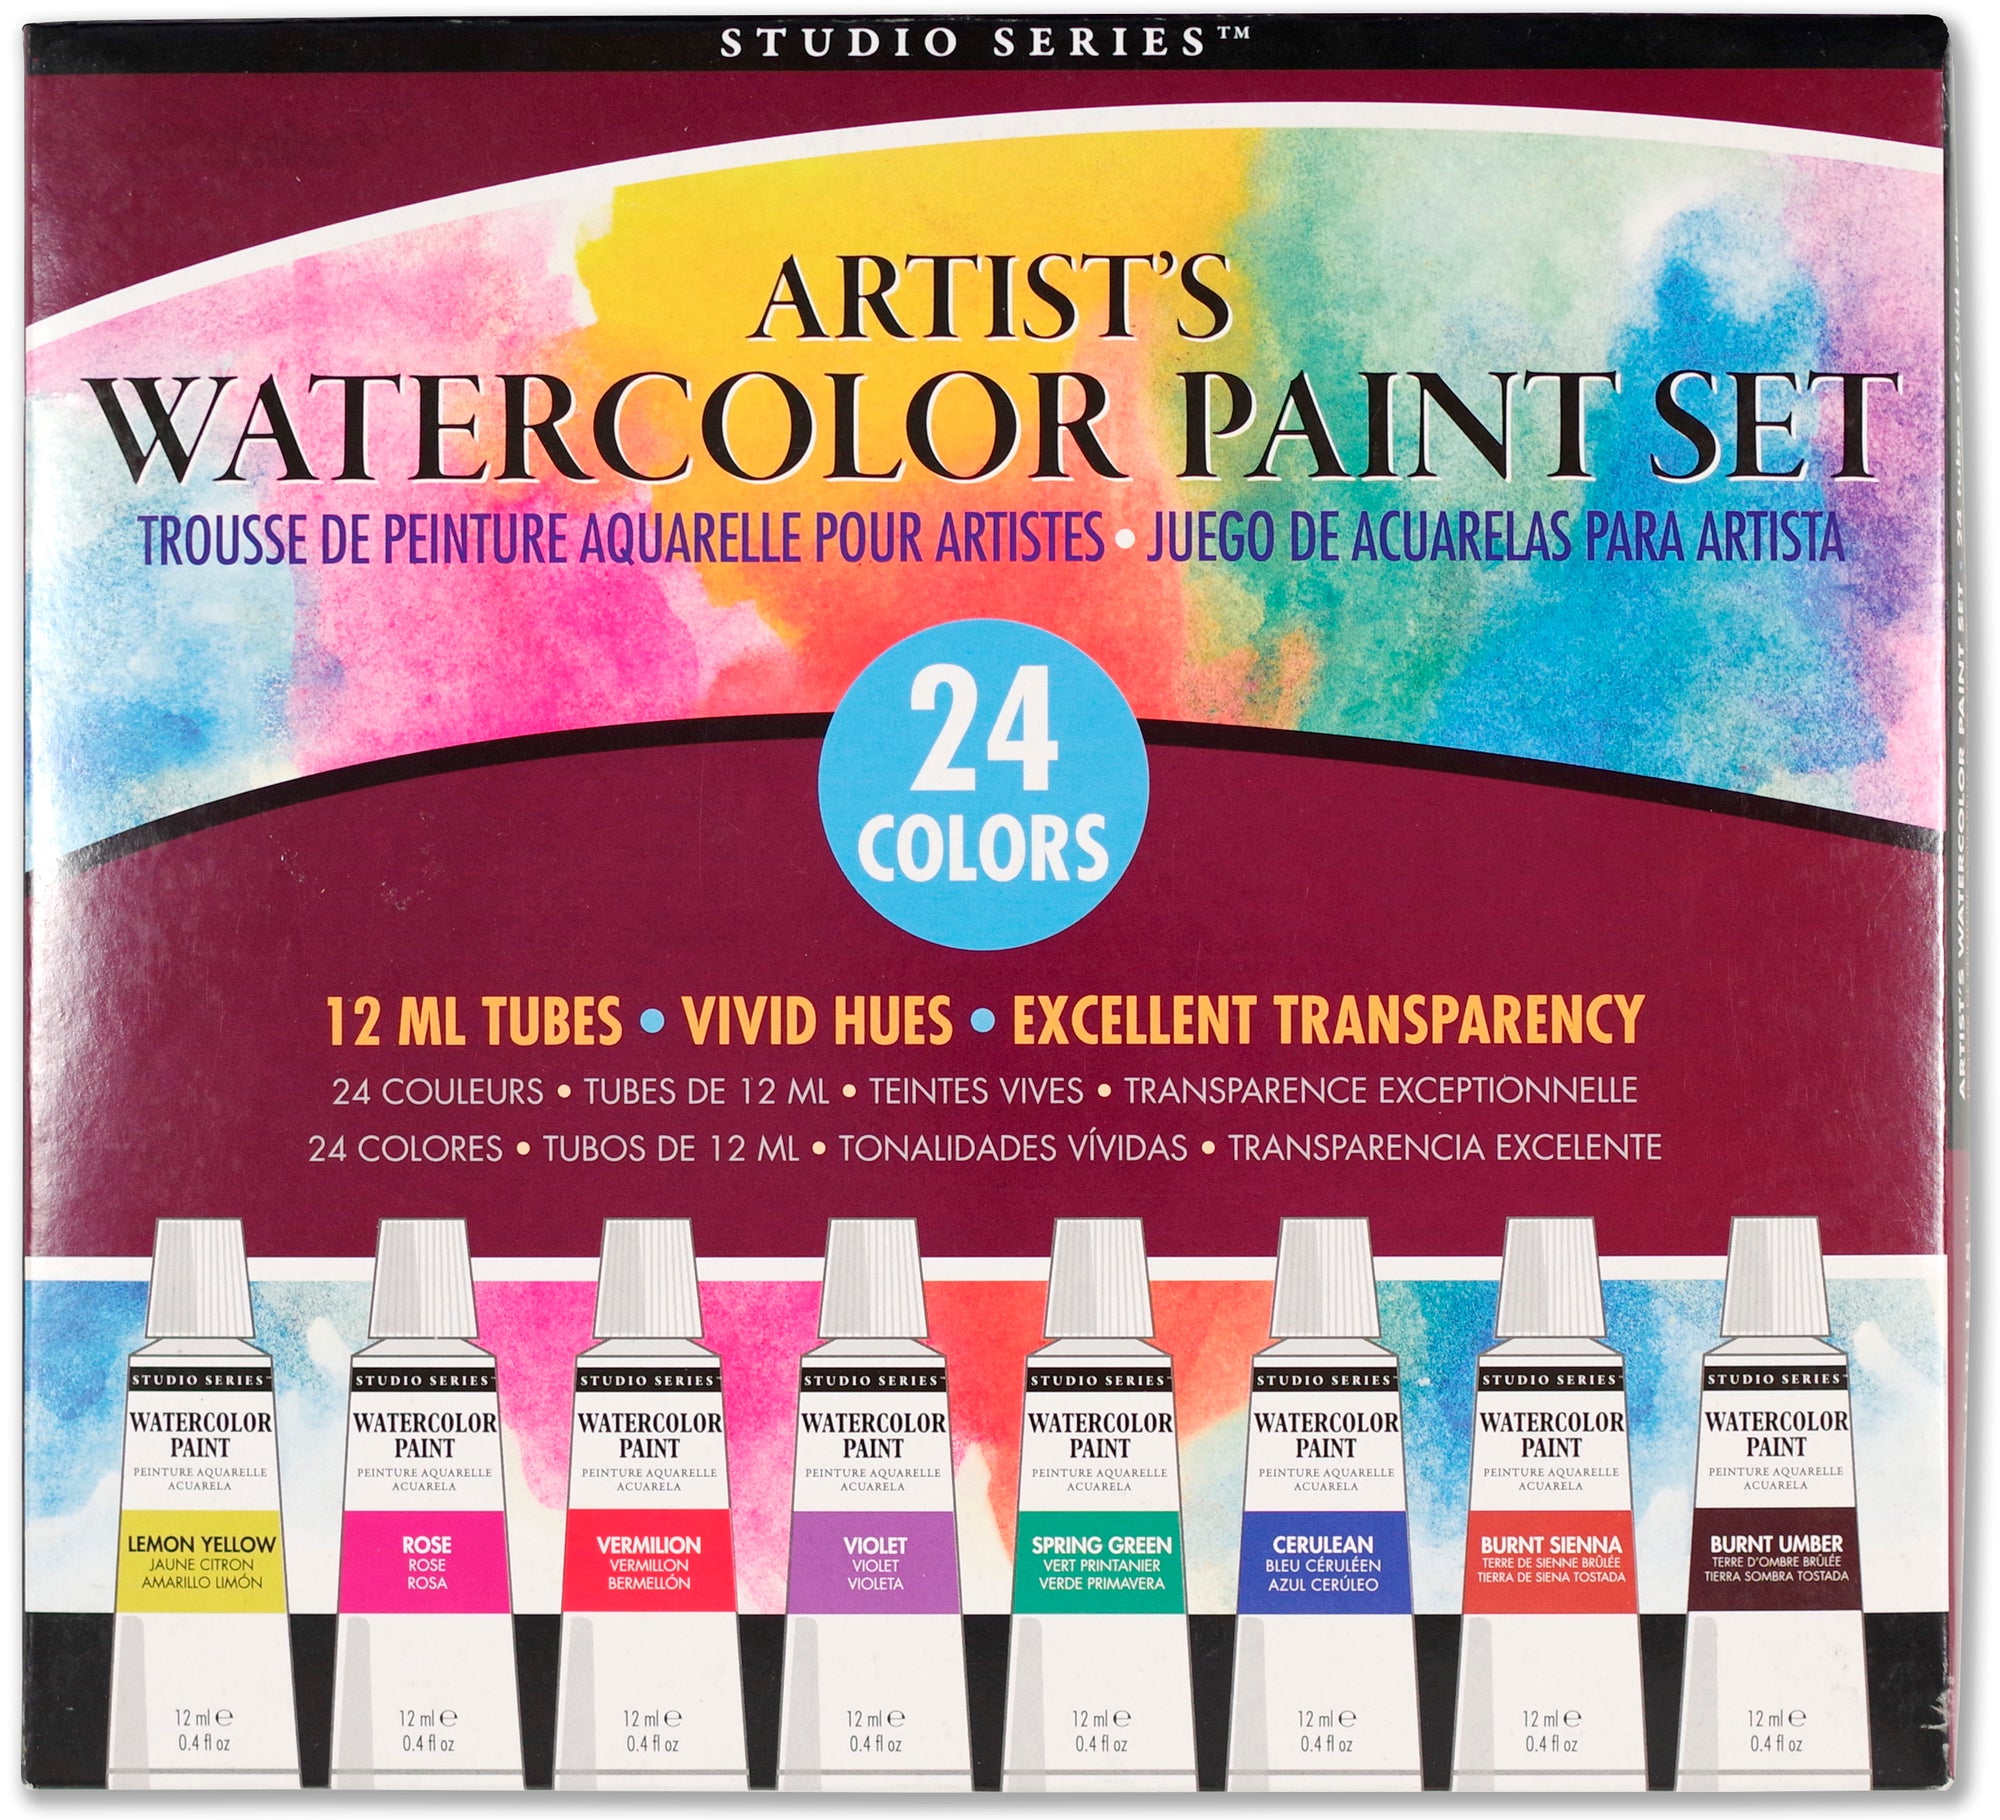 Studio Series Artist's Watercolor Paint Set - Heart of the Home PA